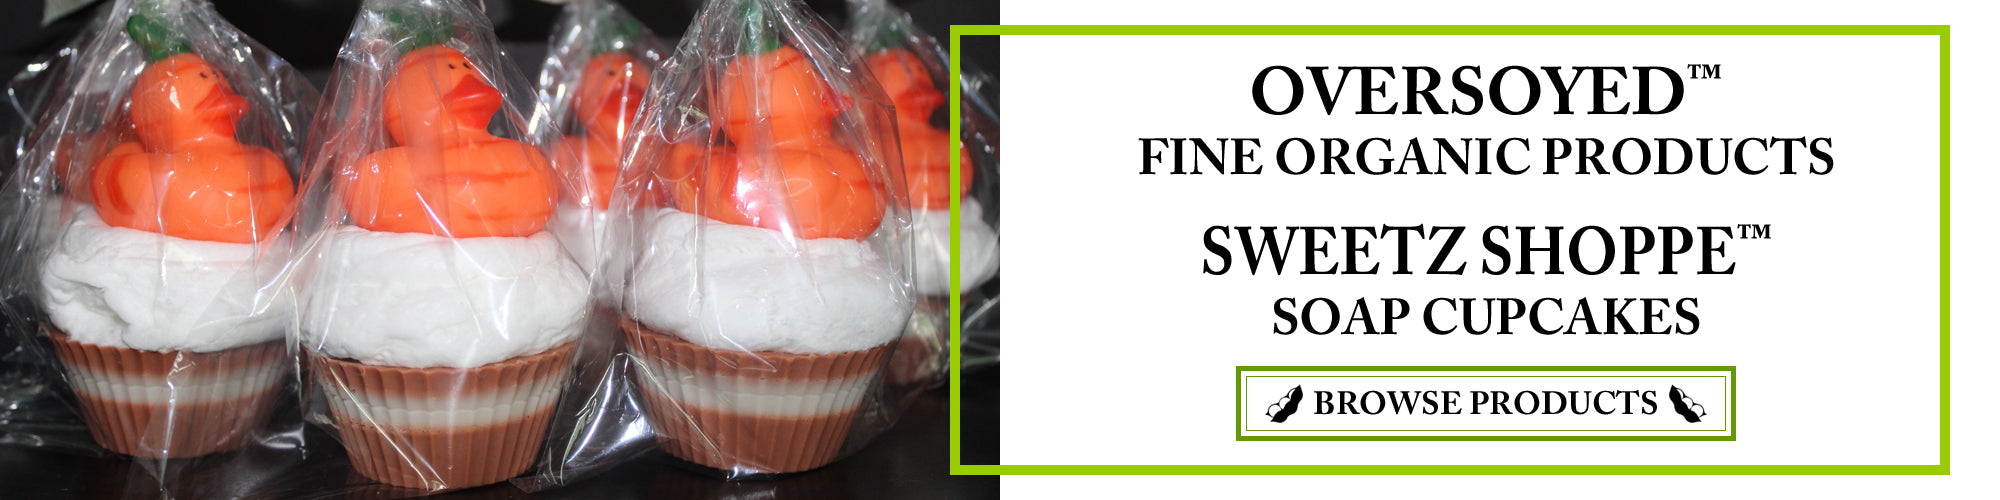 OverSoyed Fine Organic Products - Sweetz Shoppe™ Cupcake Soaps